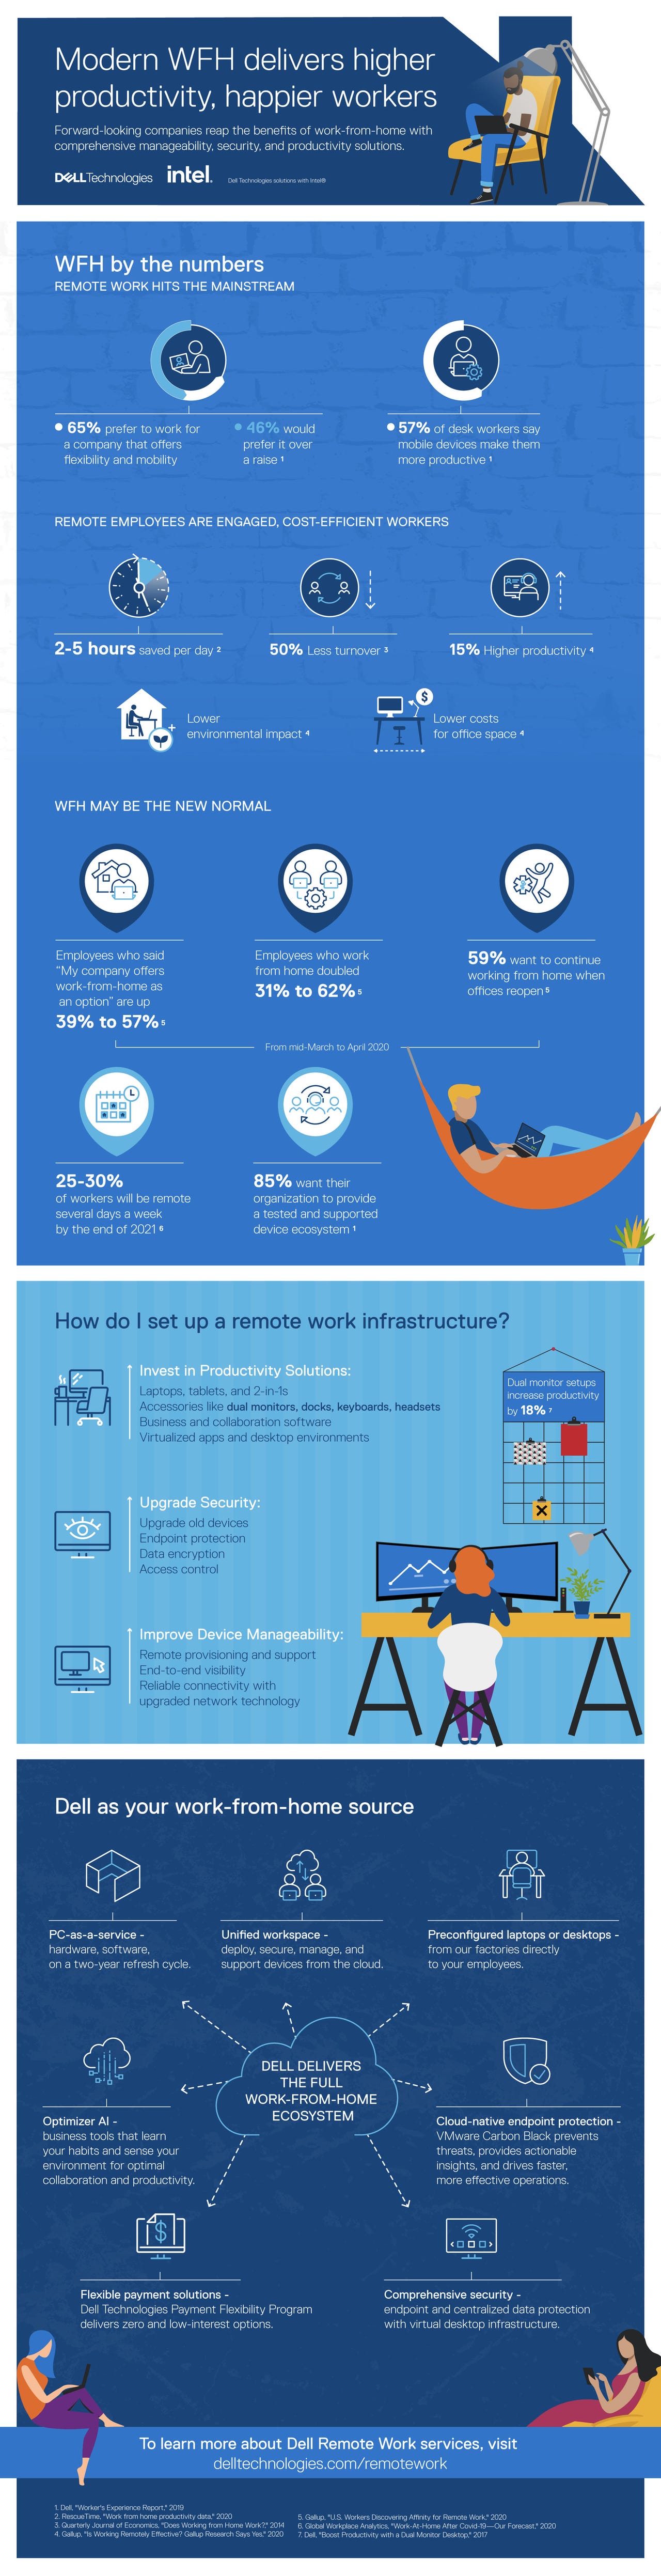 Infographic Modern WFH delivers higher productivity, happier workers